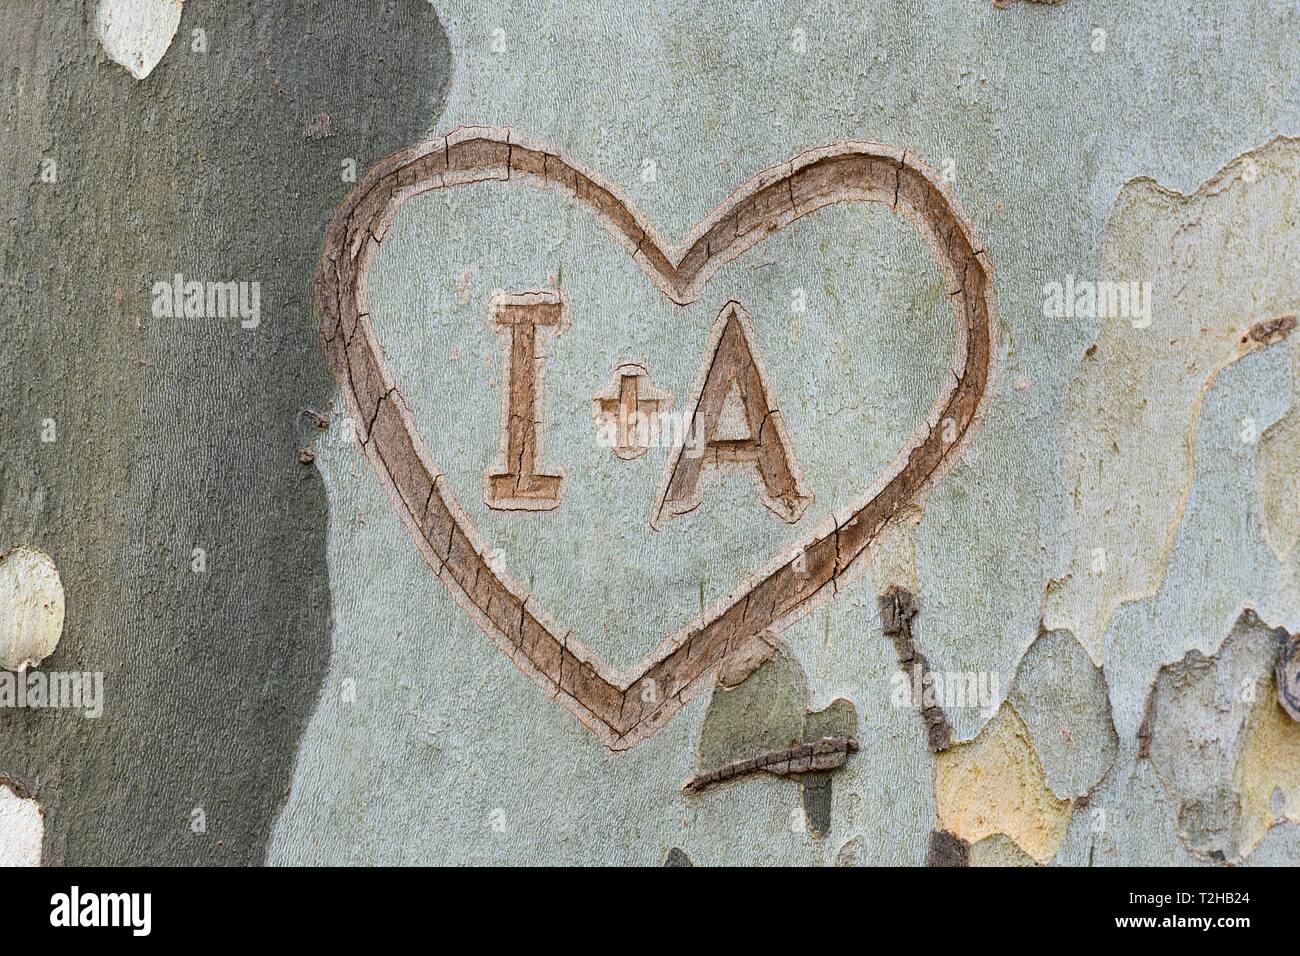 Heart carved in tree bark with letters I and A, Germany Stock Photo